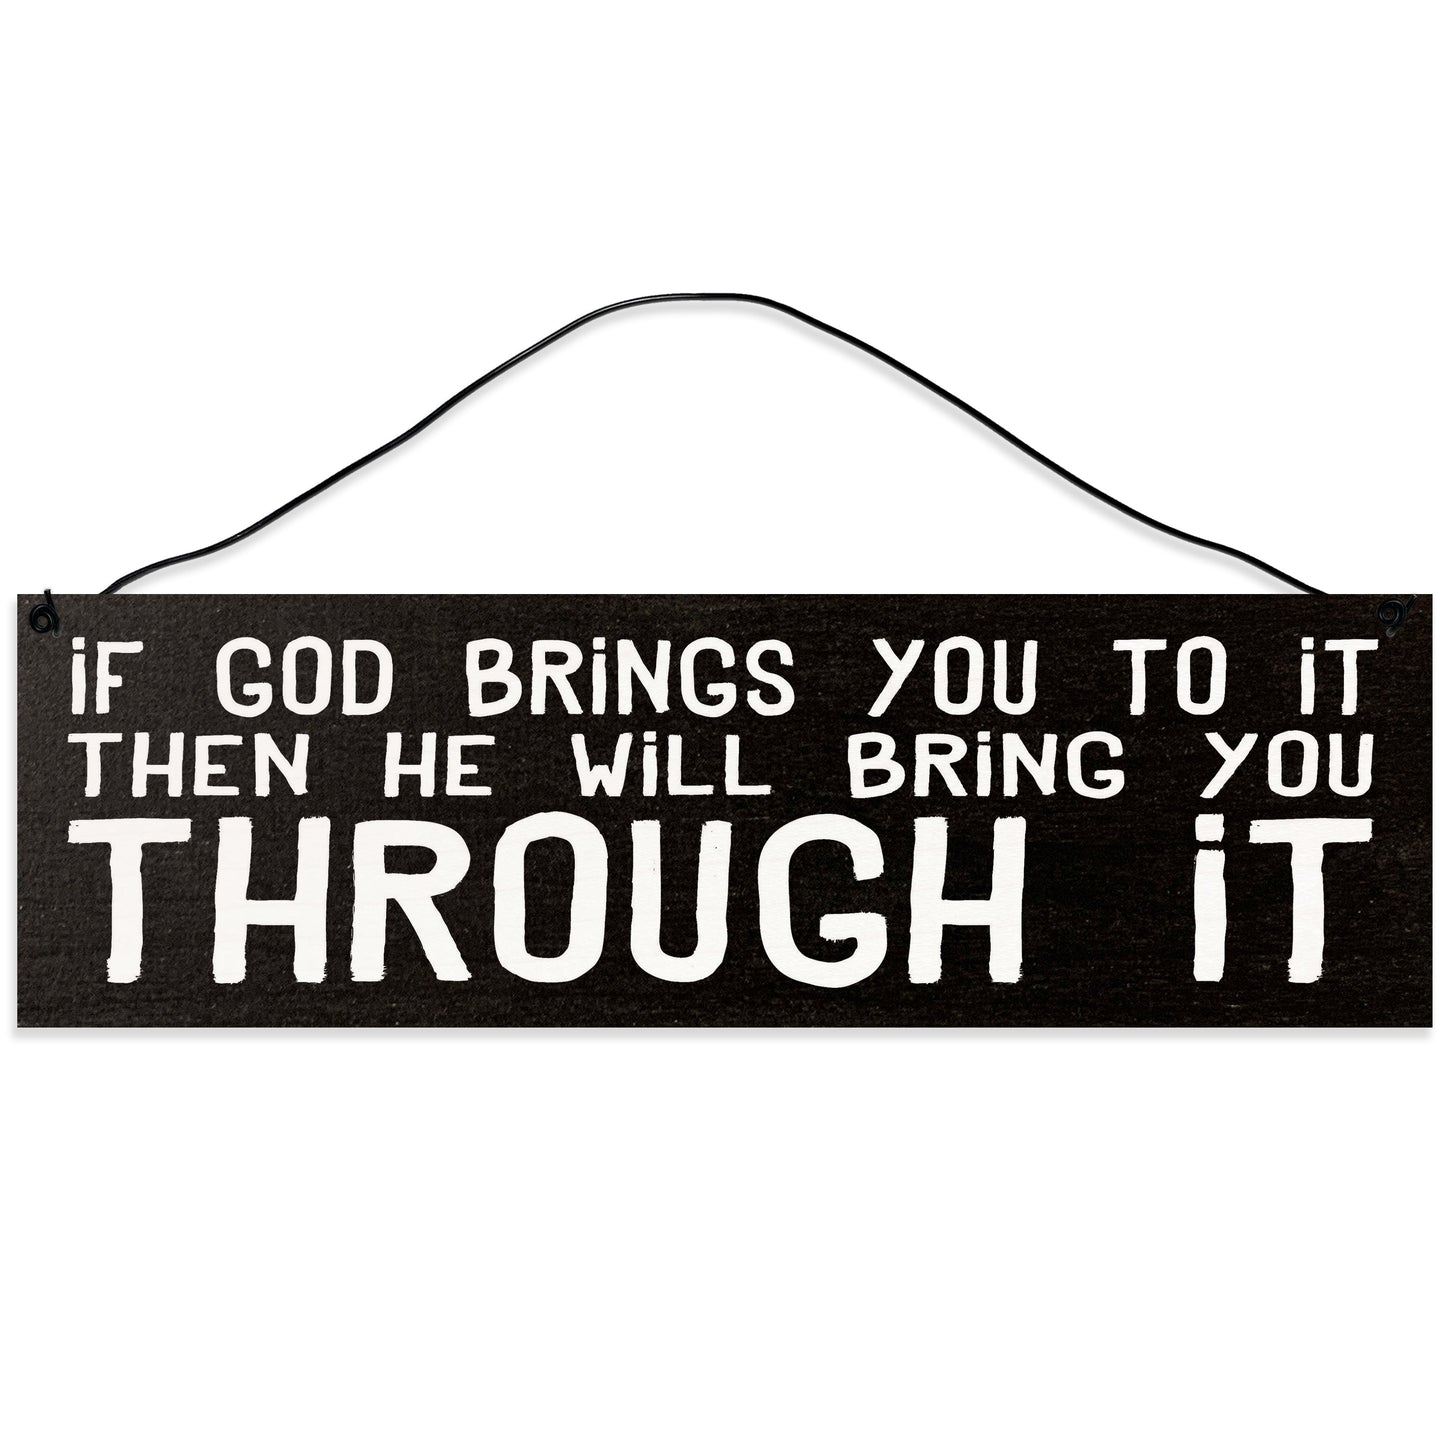 Sawyer's Mill - If God Brings You to it Then He Will Bring You Through it. Wood Sign for Home or Office. Measures 3x10 inches.